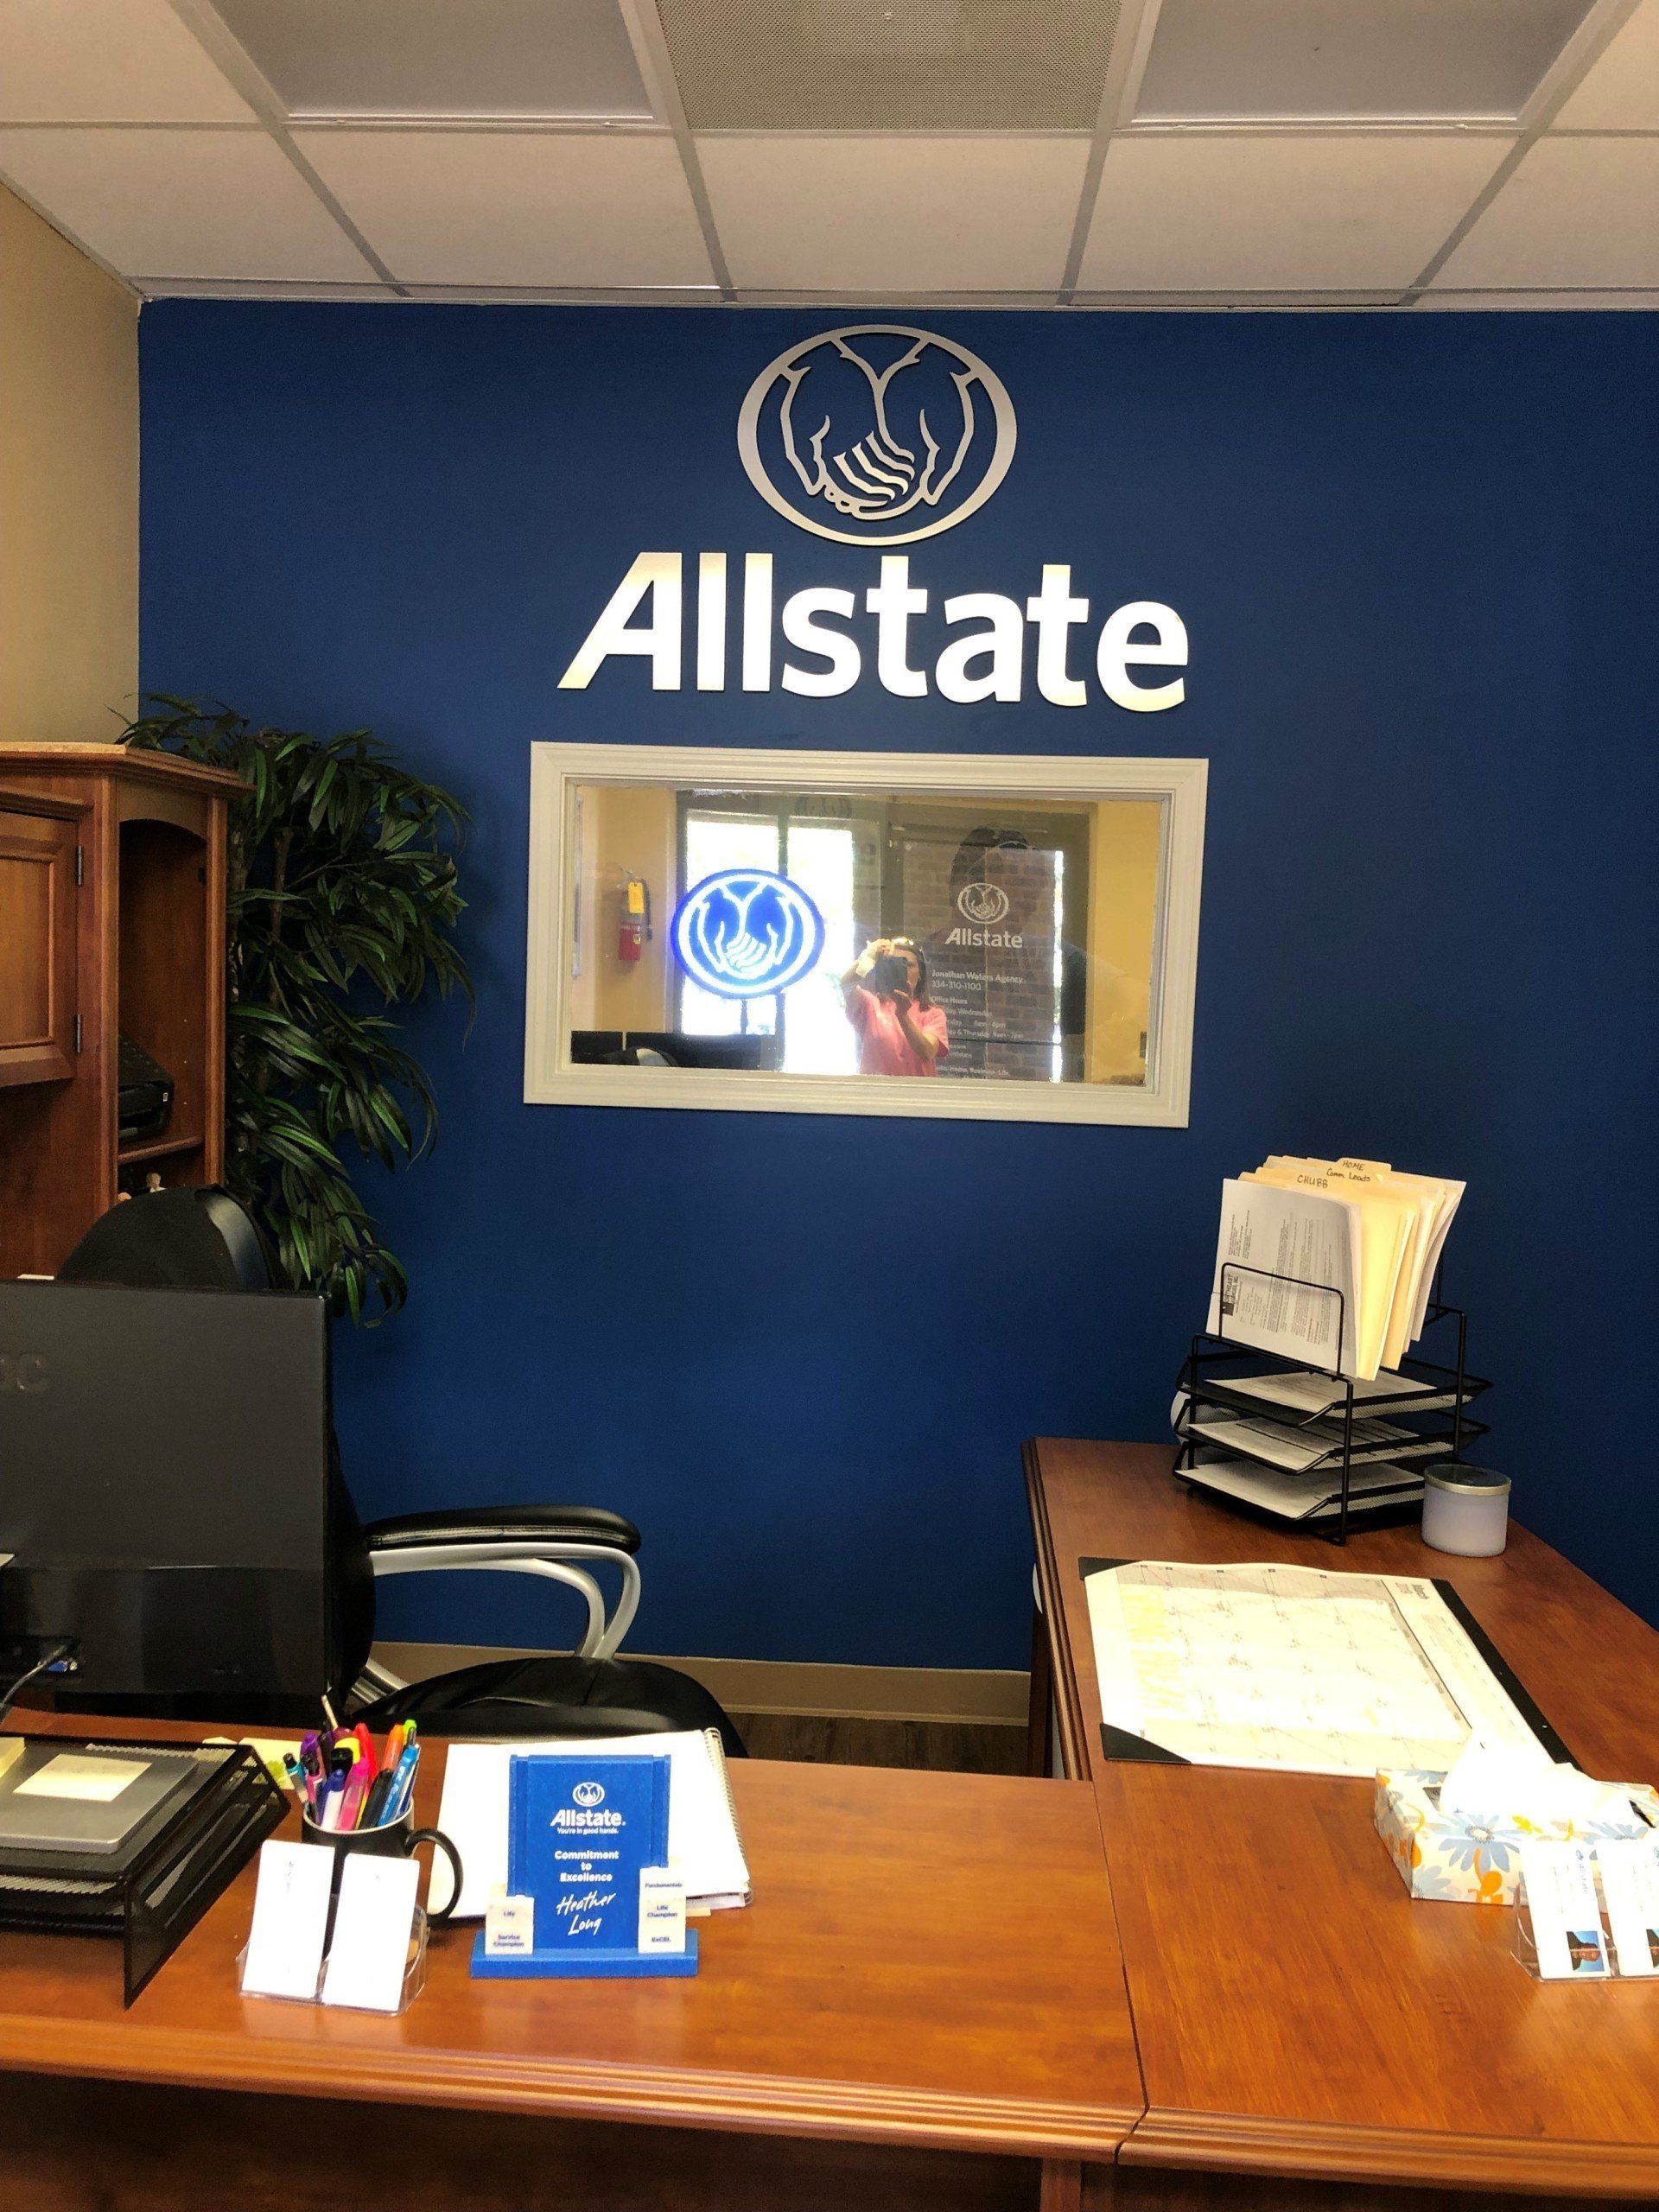 The window glass from the inner office was 1-way mirror tinted for privacy on 3.22.2019, at Allstate business in Prattville, AL